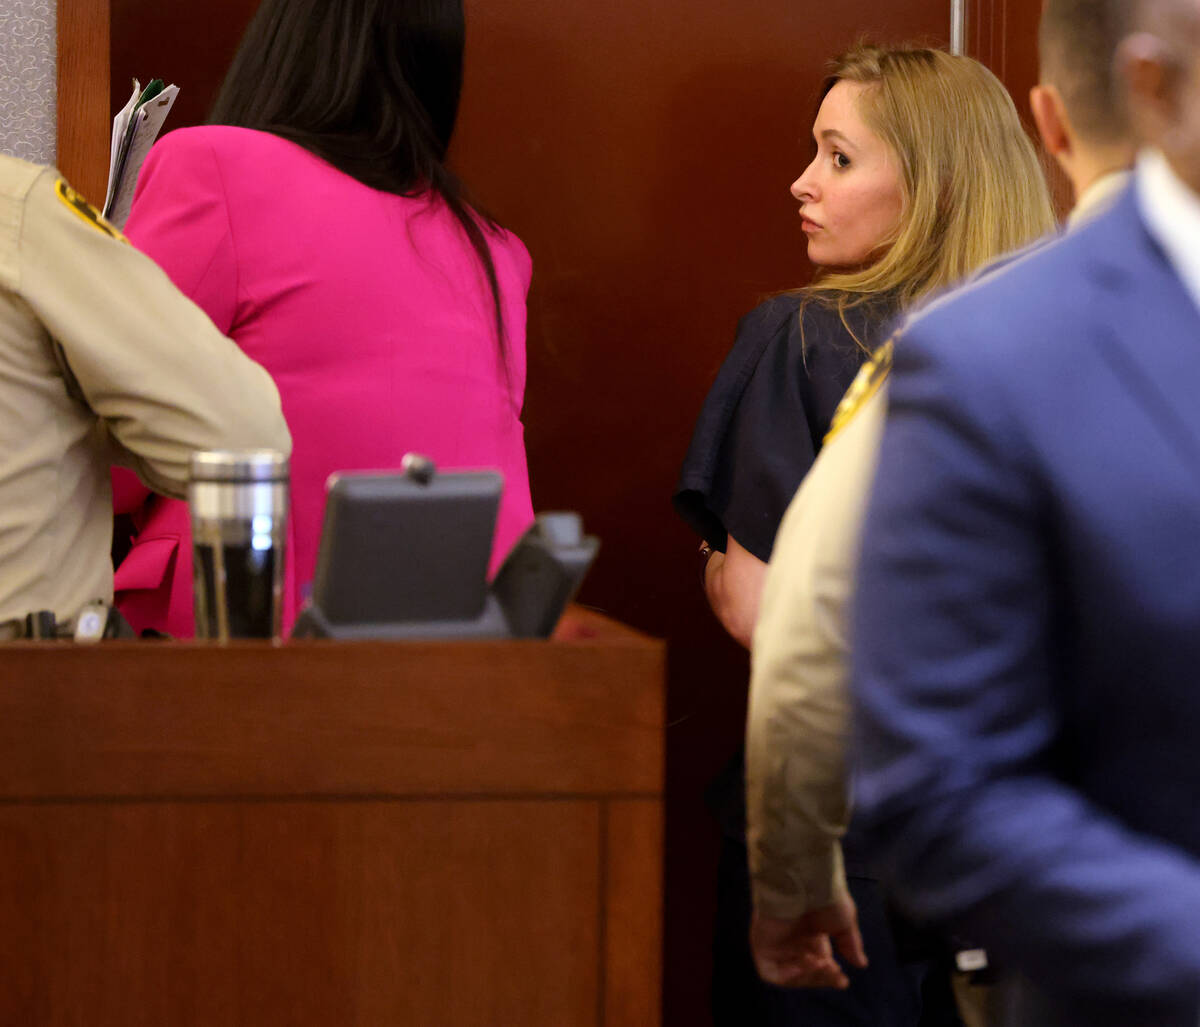 Kelsey Turner looks back as she leaves the courtroom after sentencing at the Regional Justice C ...